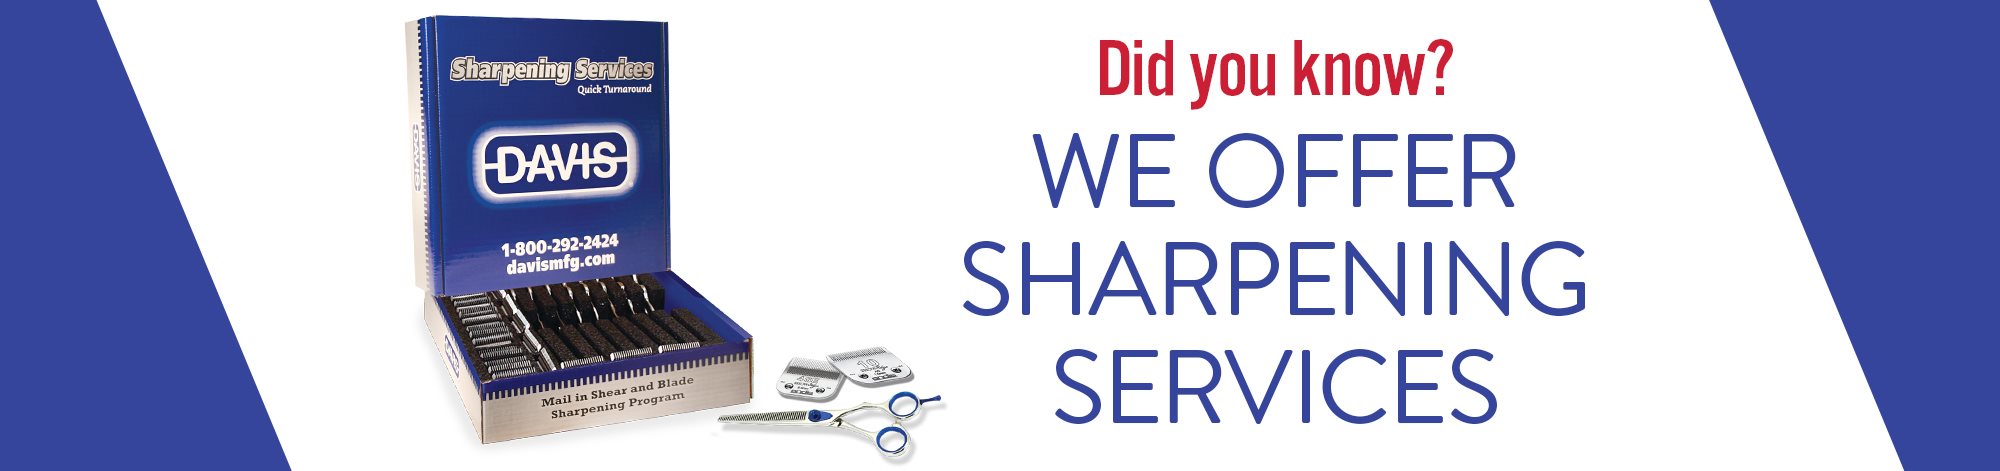 Did you know? We offer sharpening services